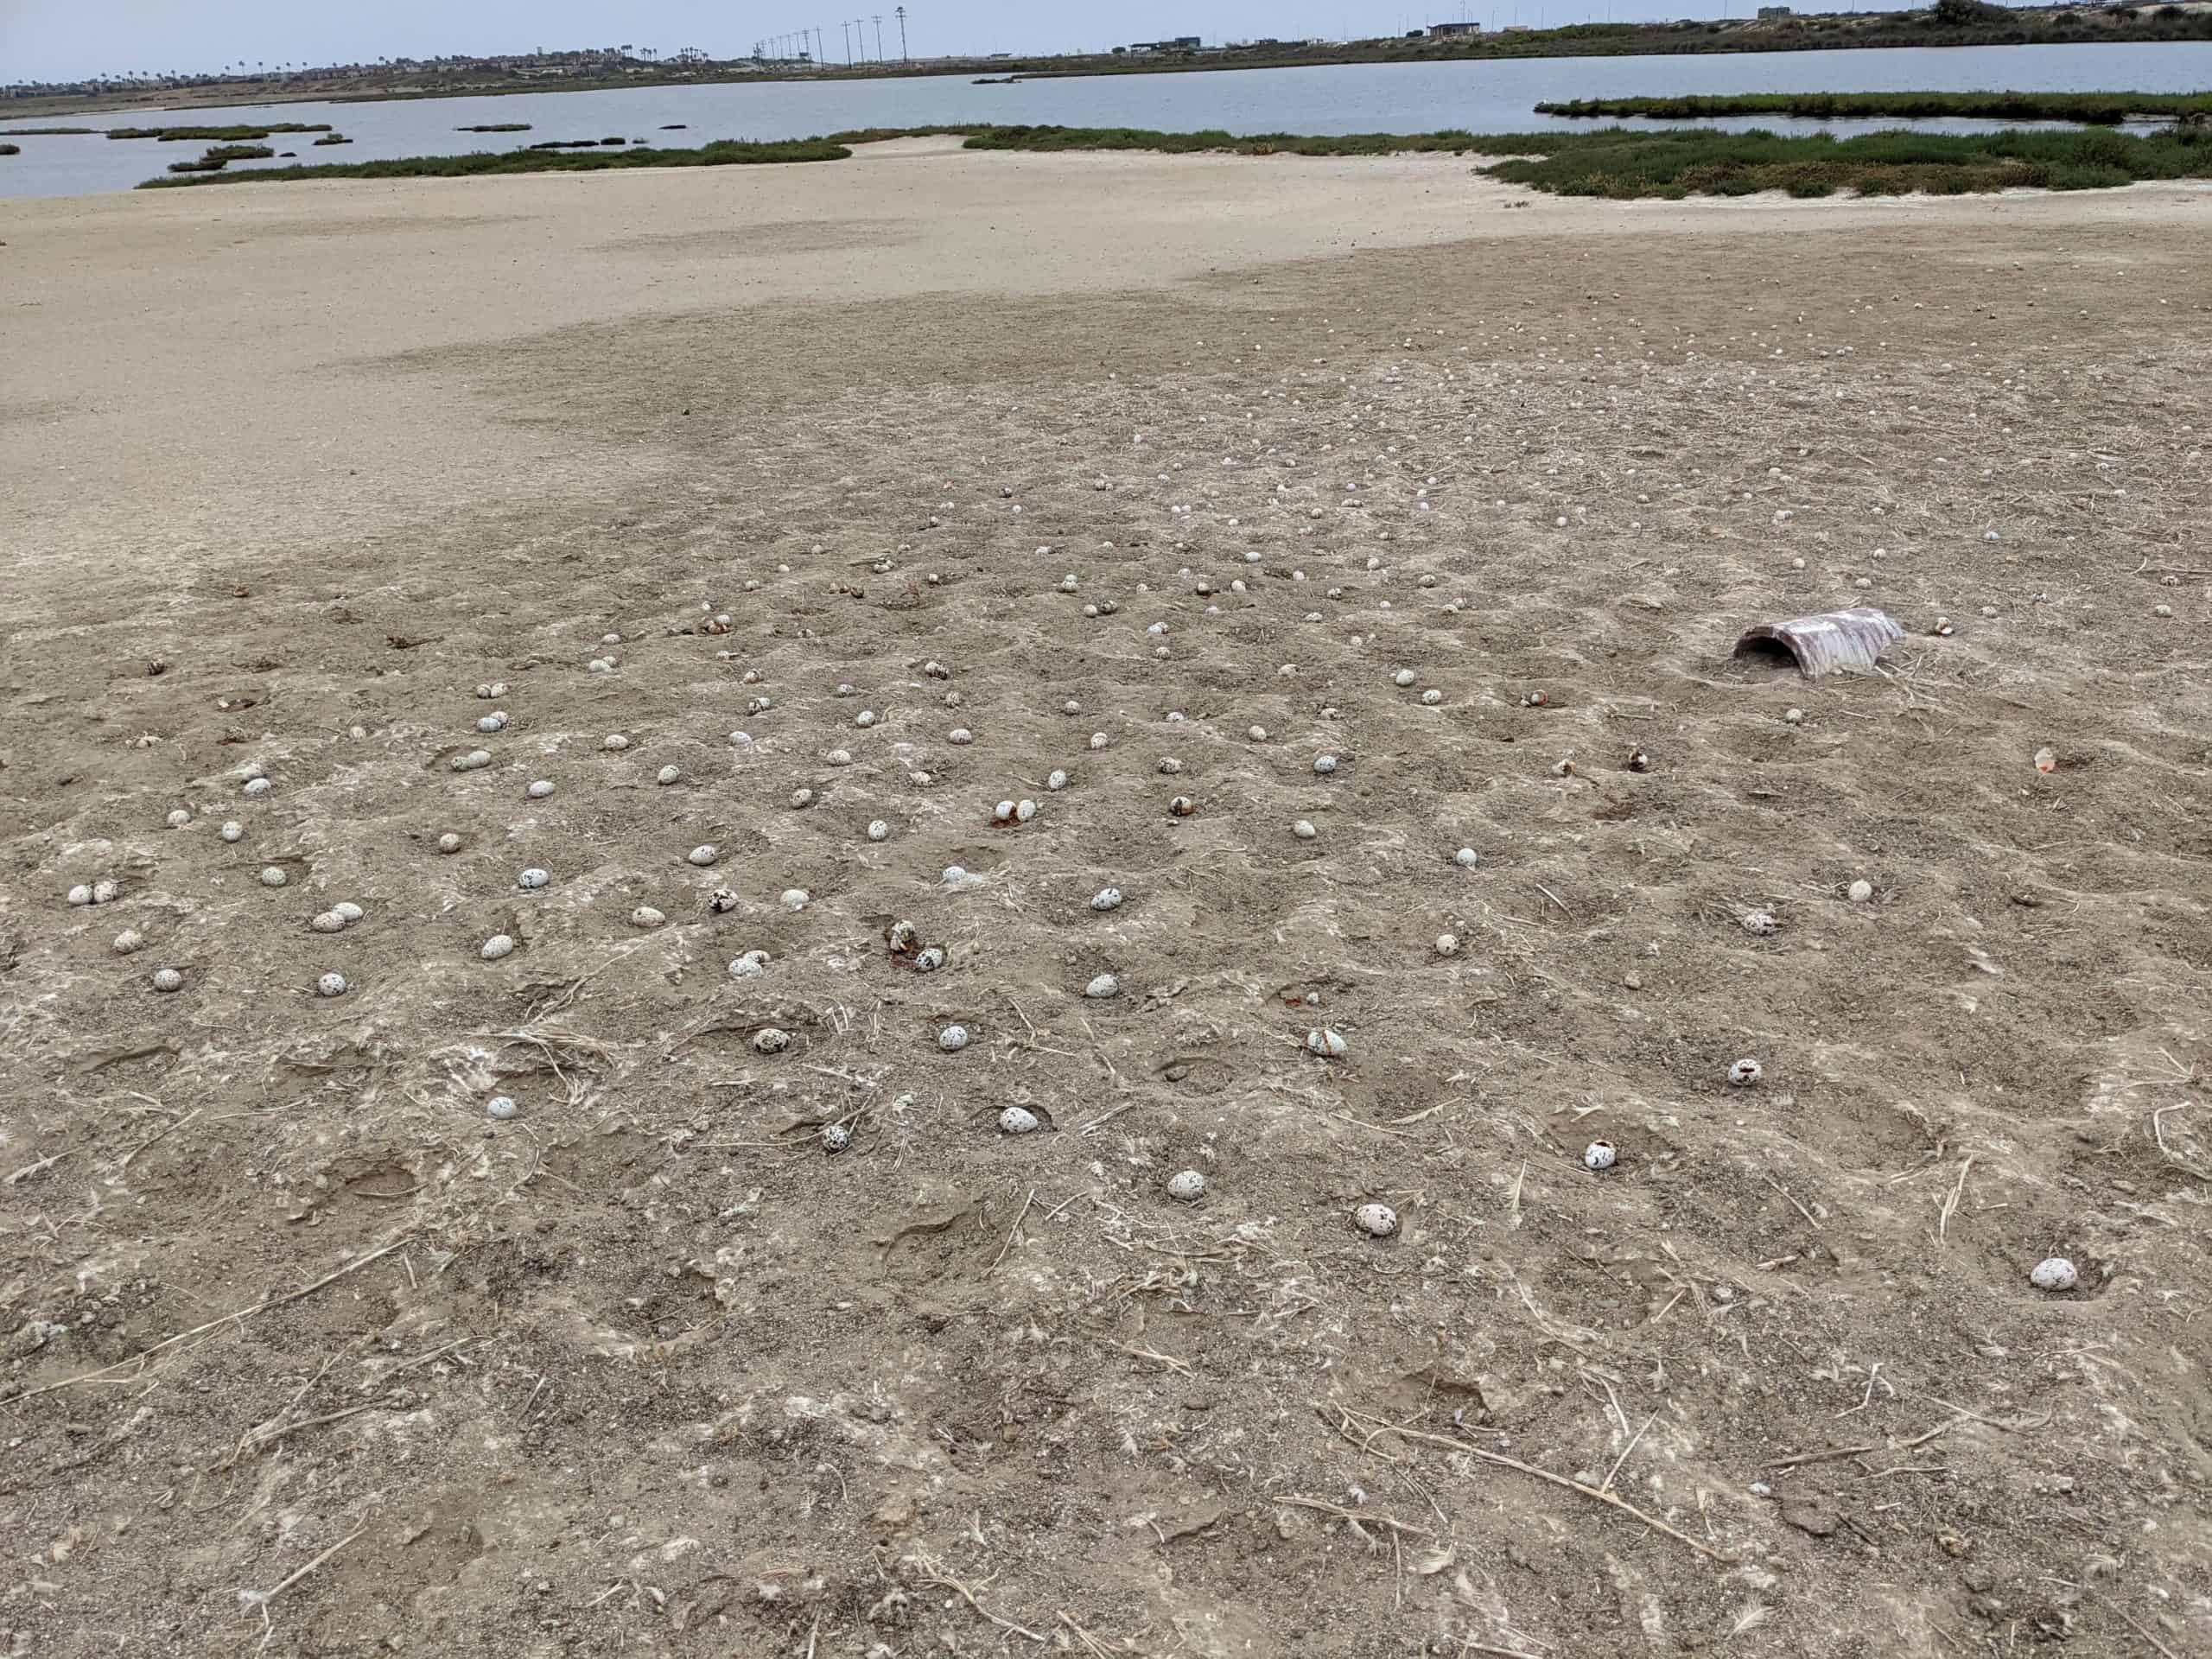 3,000 eggs abandoned after drone scares birds leaving sand littered with egg shells